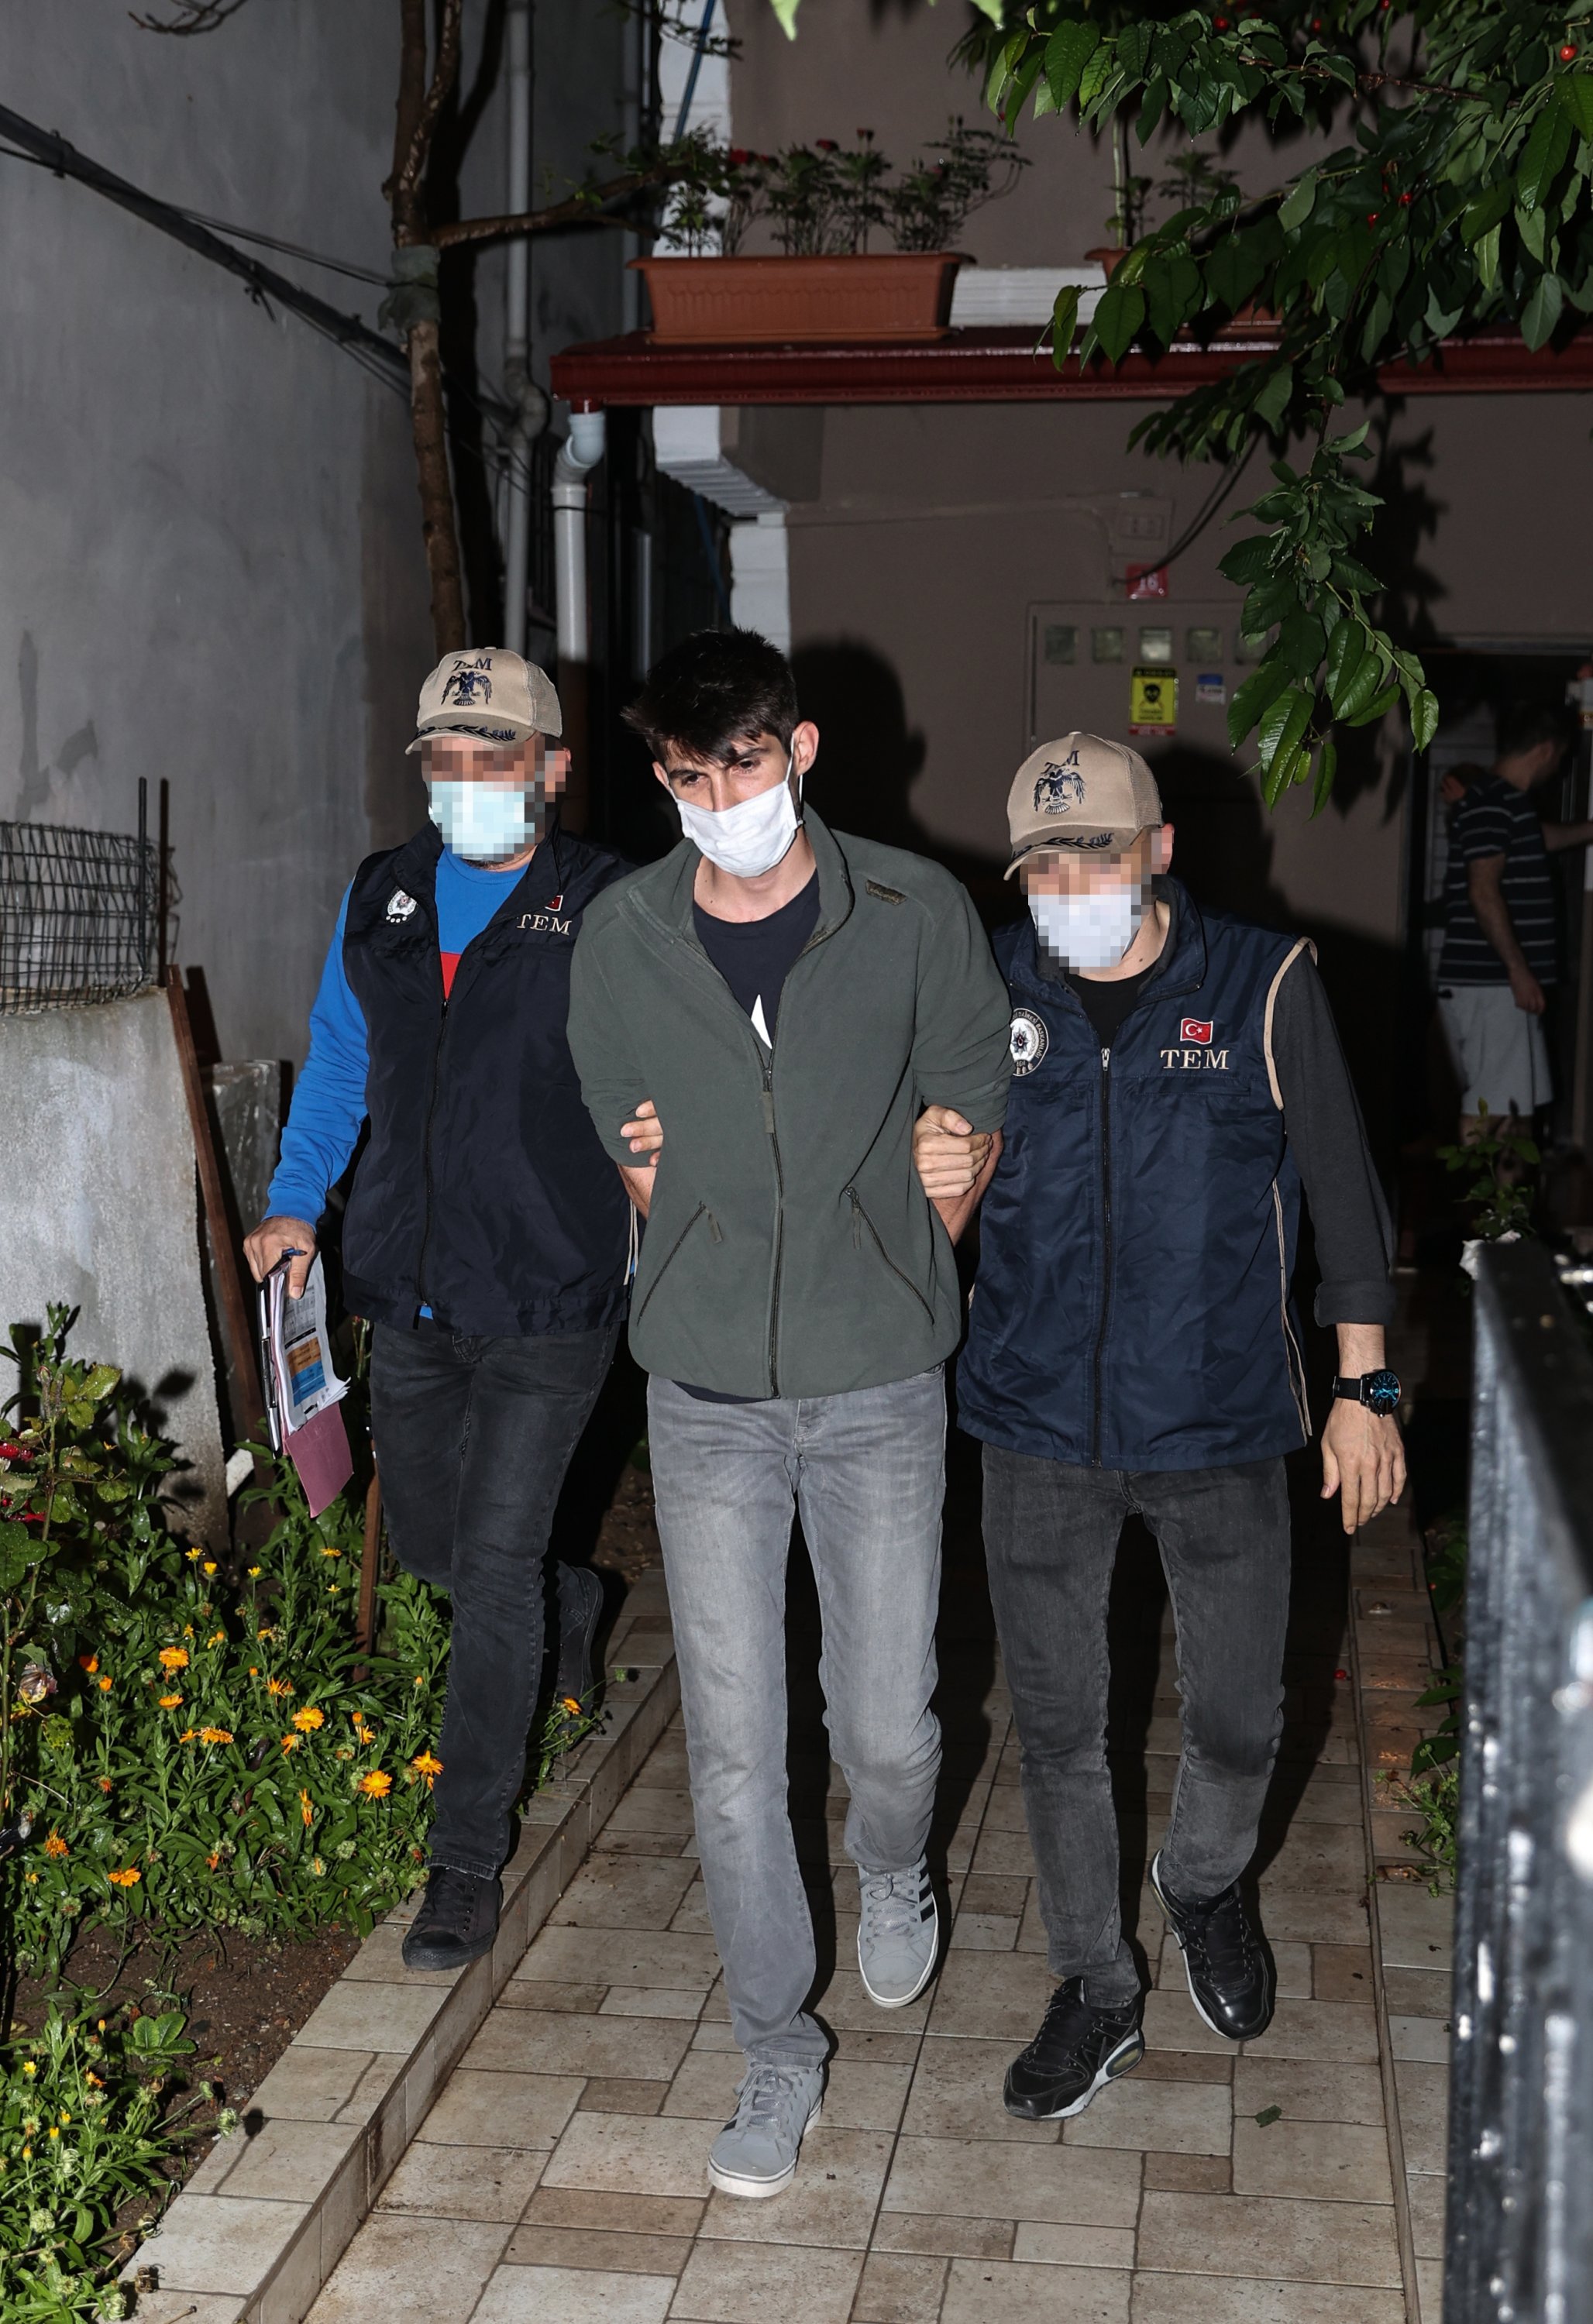 An operation was launched in 17 provinces to apprehend 52 suspects for whom detention warrants were issued for alleged involvement in the Turkish Armed Forces (TSK) structuring of the Gülenist Terror Group (FETÖ). As part of the ongoing operation, it was reported that many suspects were caught and searches continue. (AA Photo)